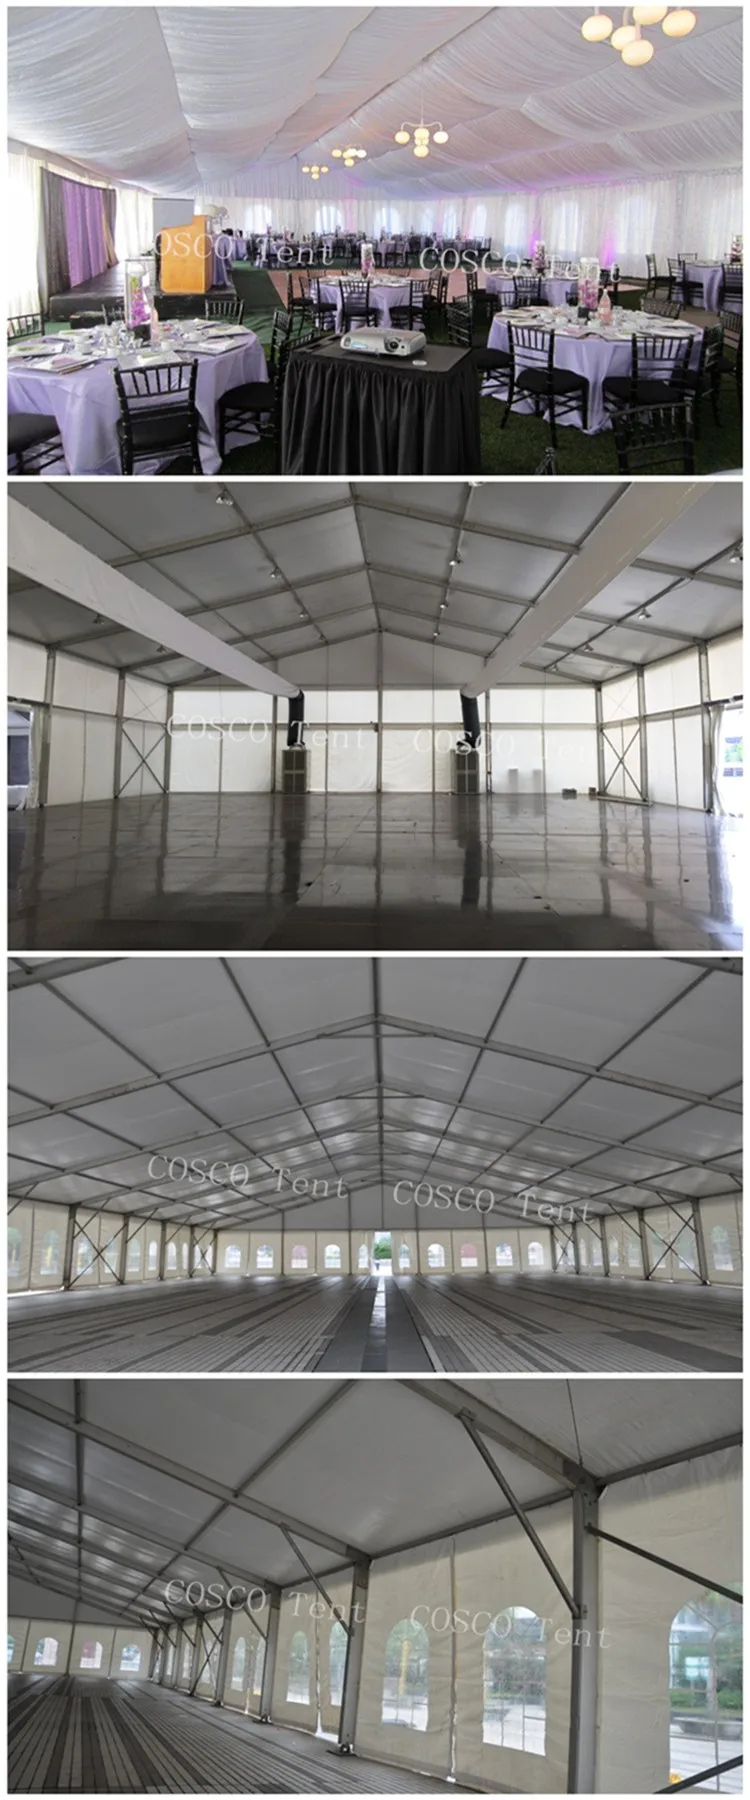 Special large outdoor curved event tent for exhibition